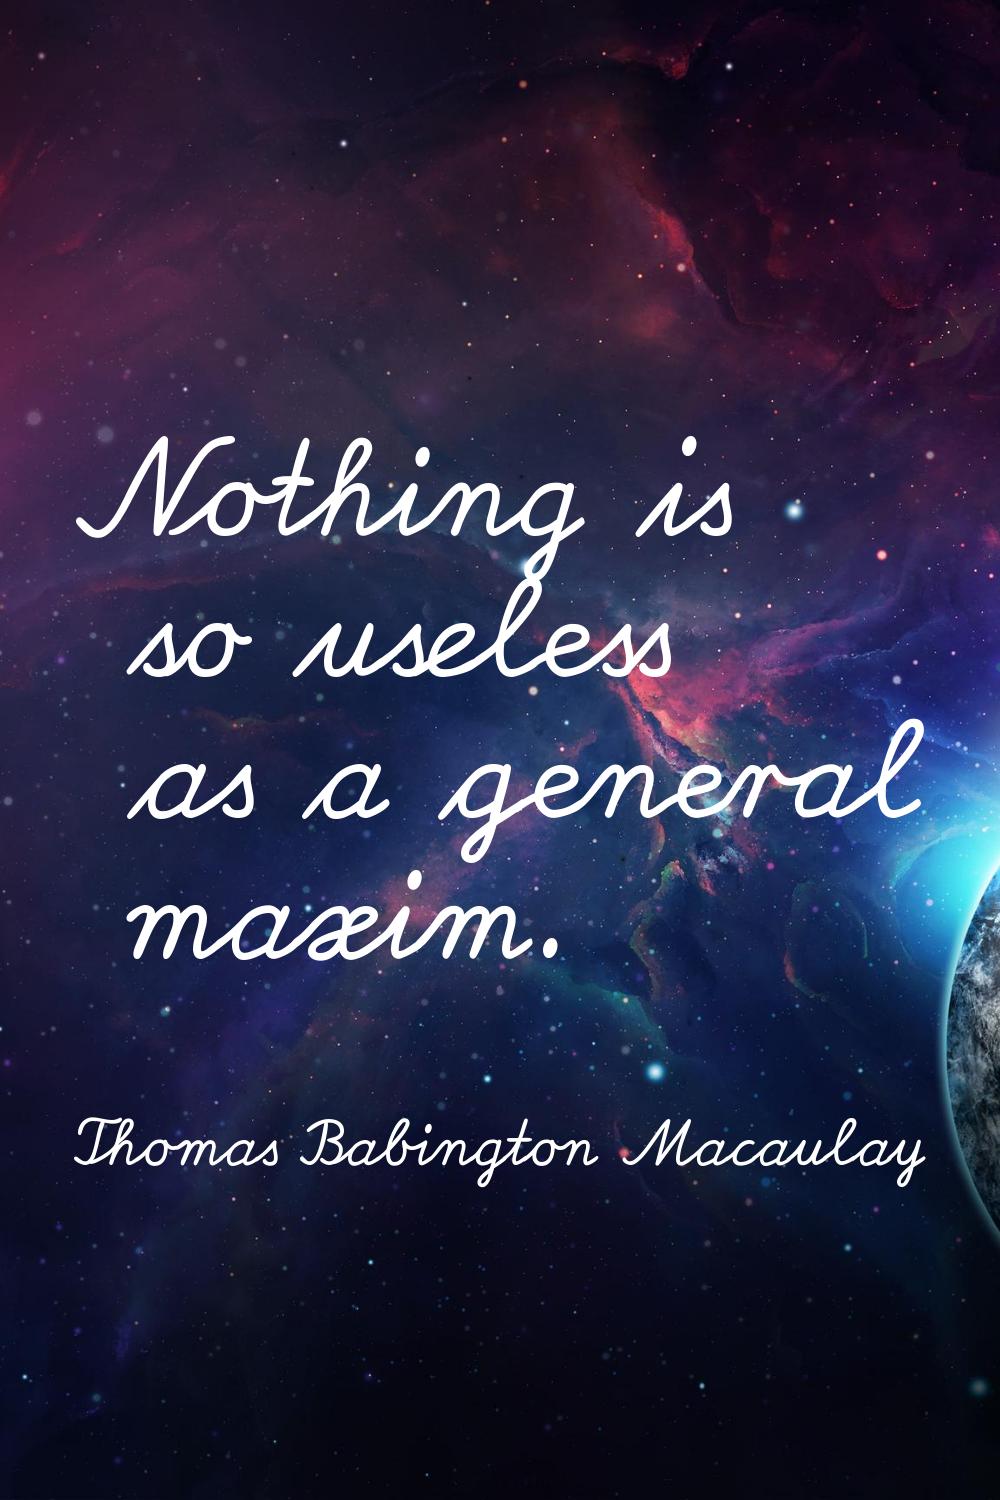 Nothing is so useless as a general maxim.